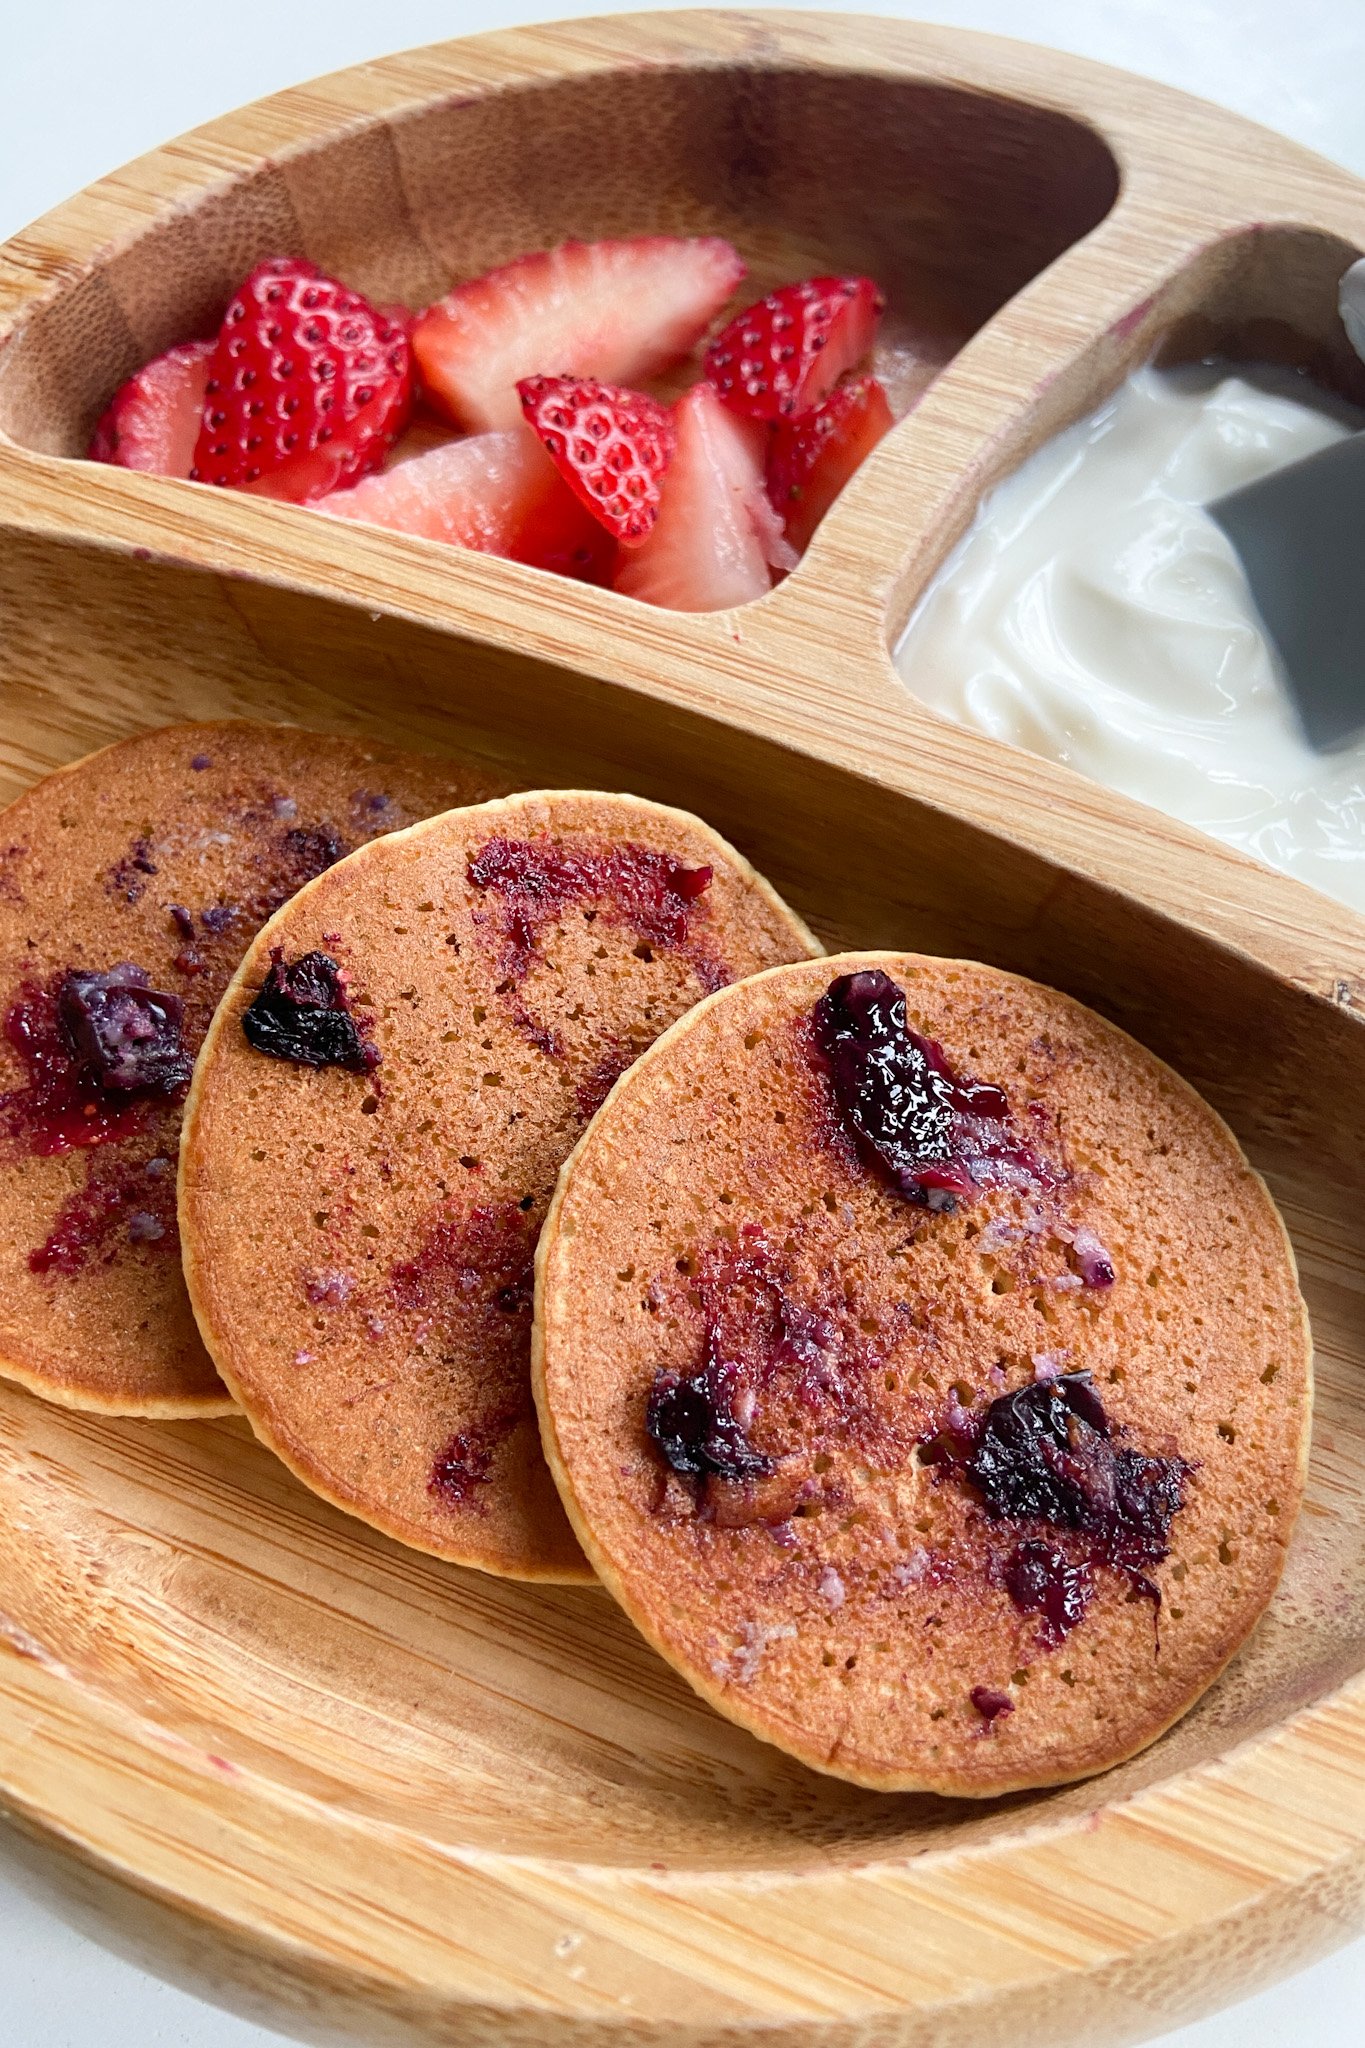 Blueberry oat pancakes served with sliced strawberries and yogurt